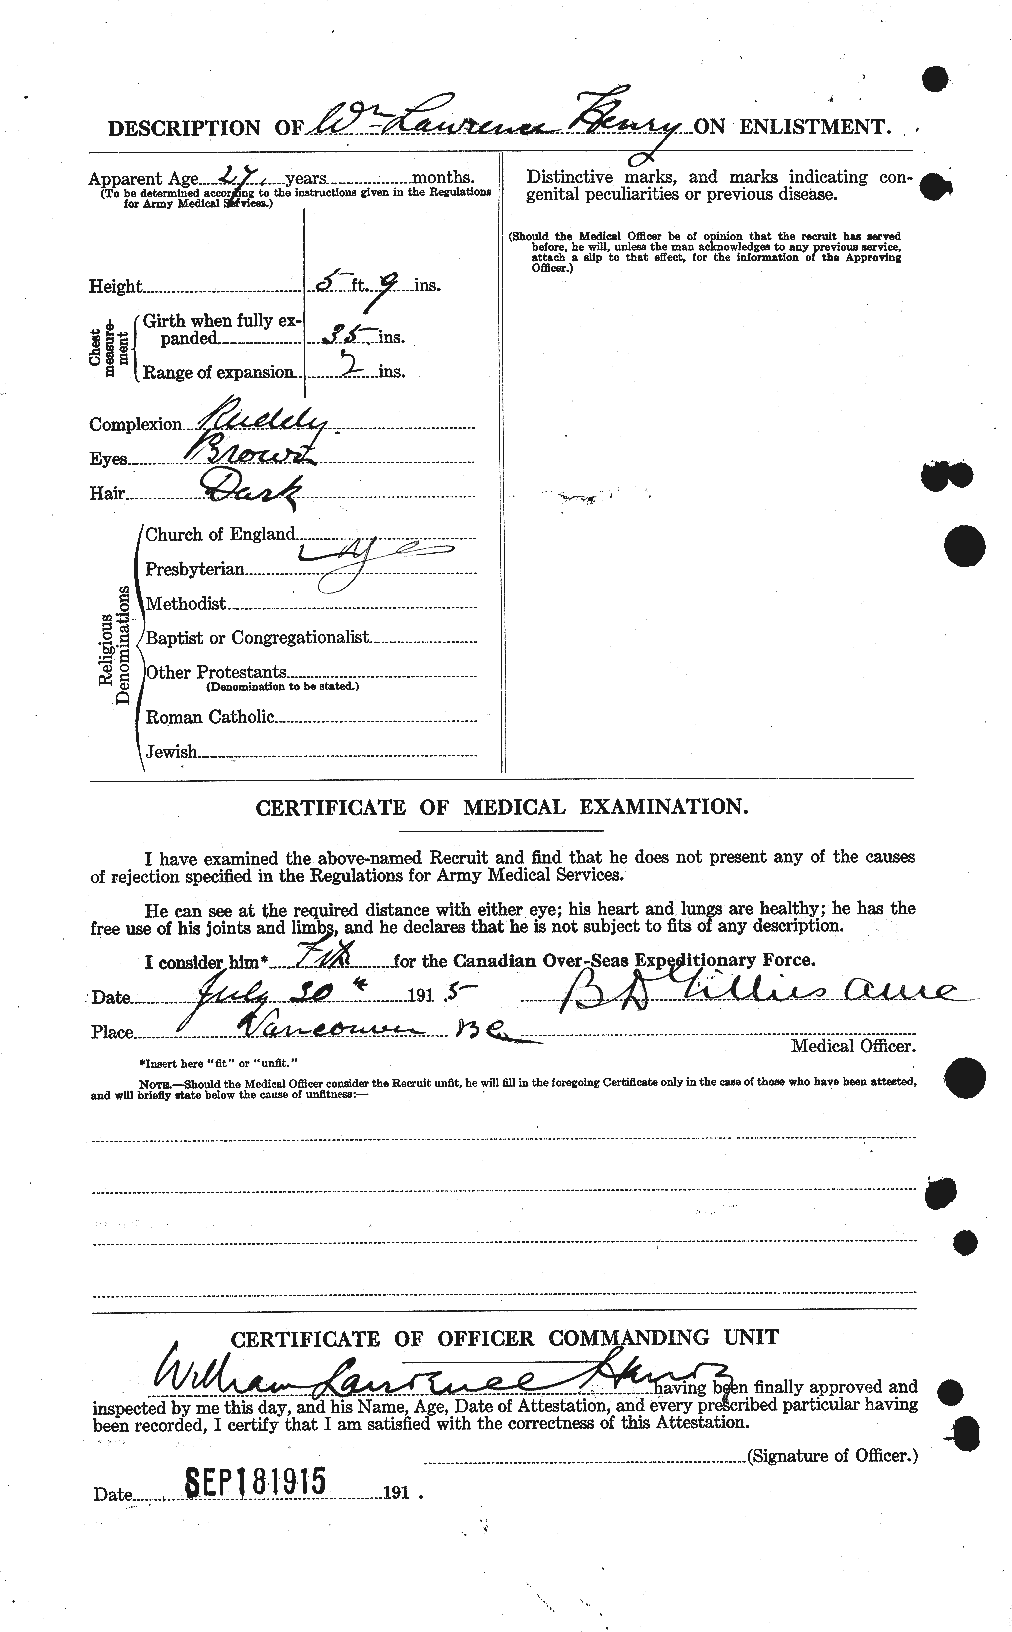 Personnel Records of the First World War - CEF 387789b